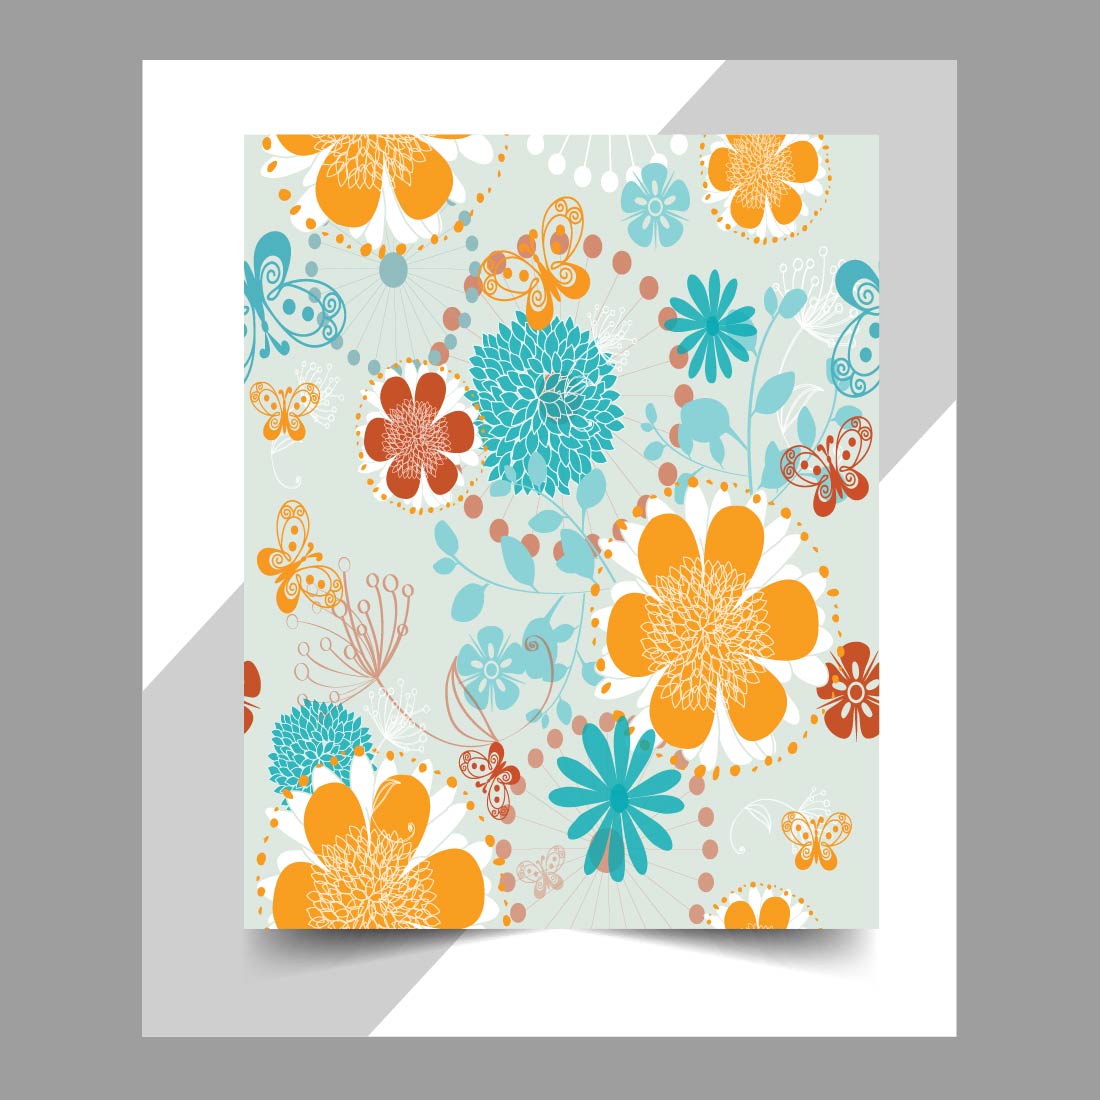 I will design seamless repeat vector patterns for textile prints preview image.